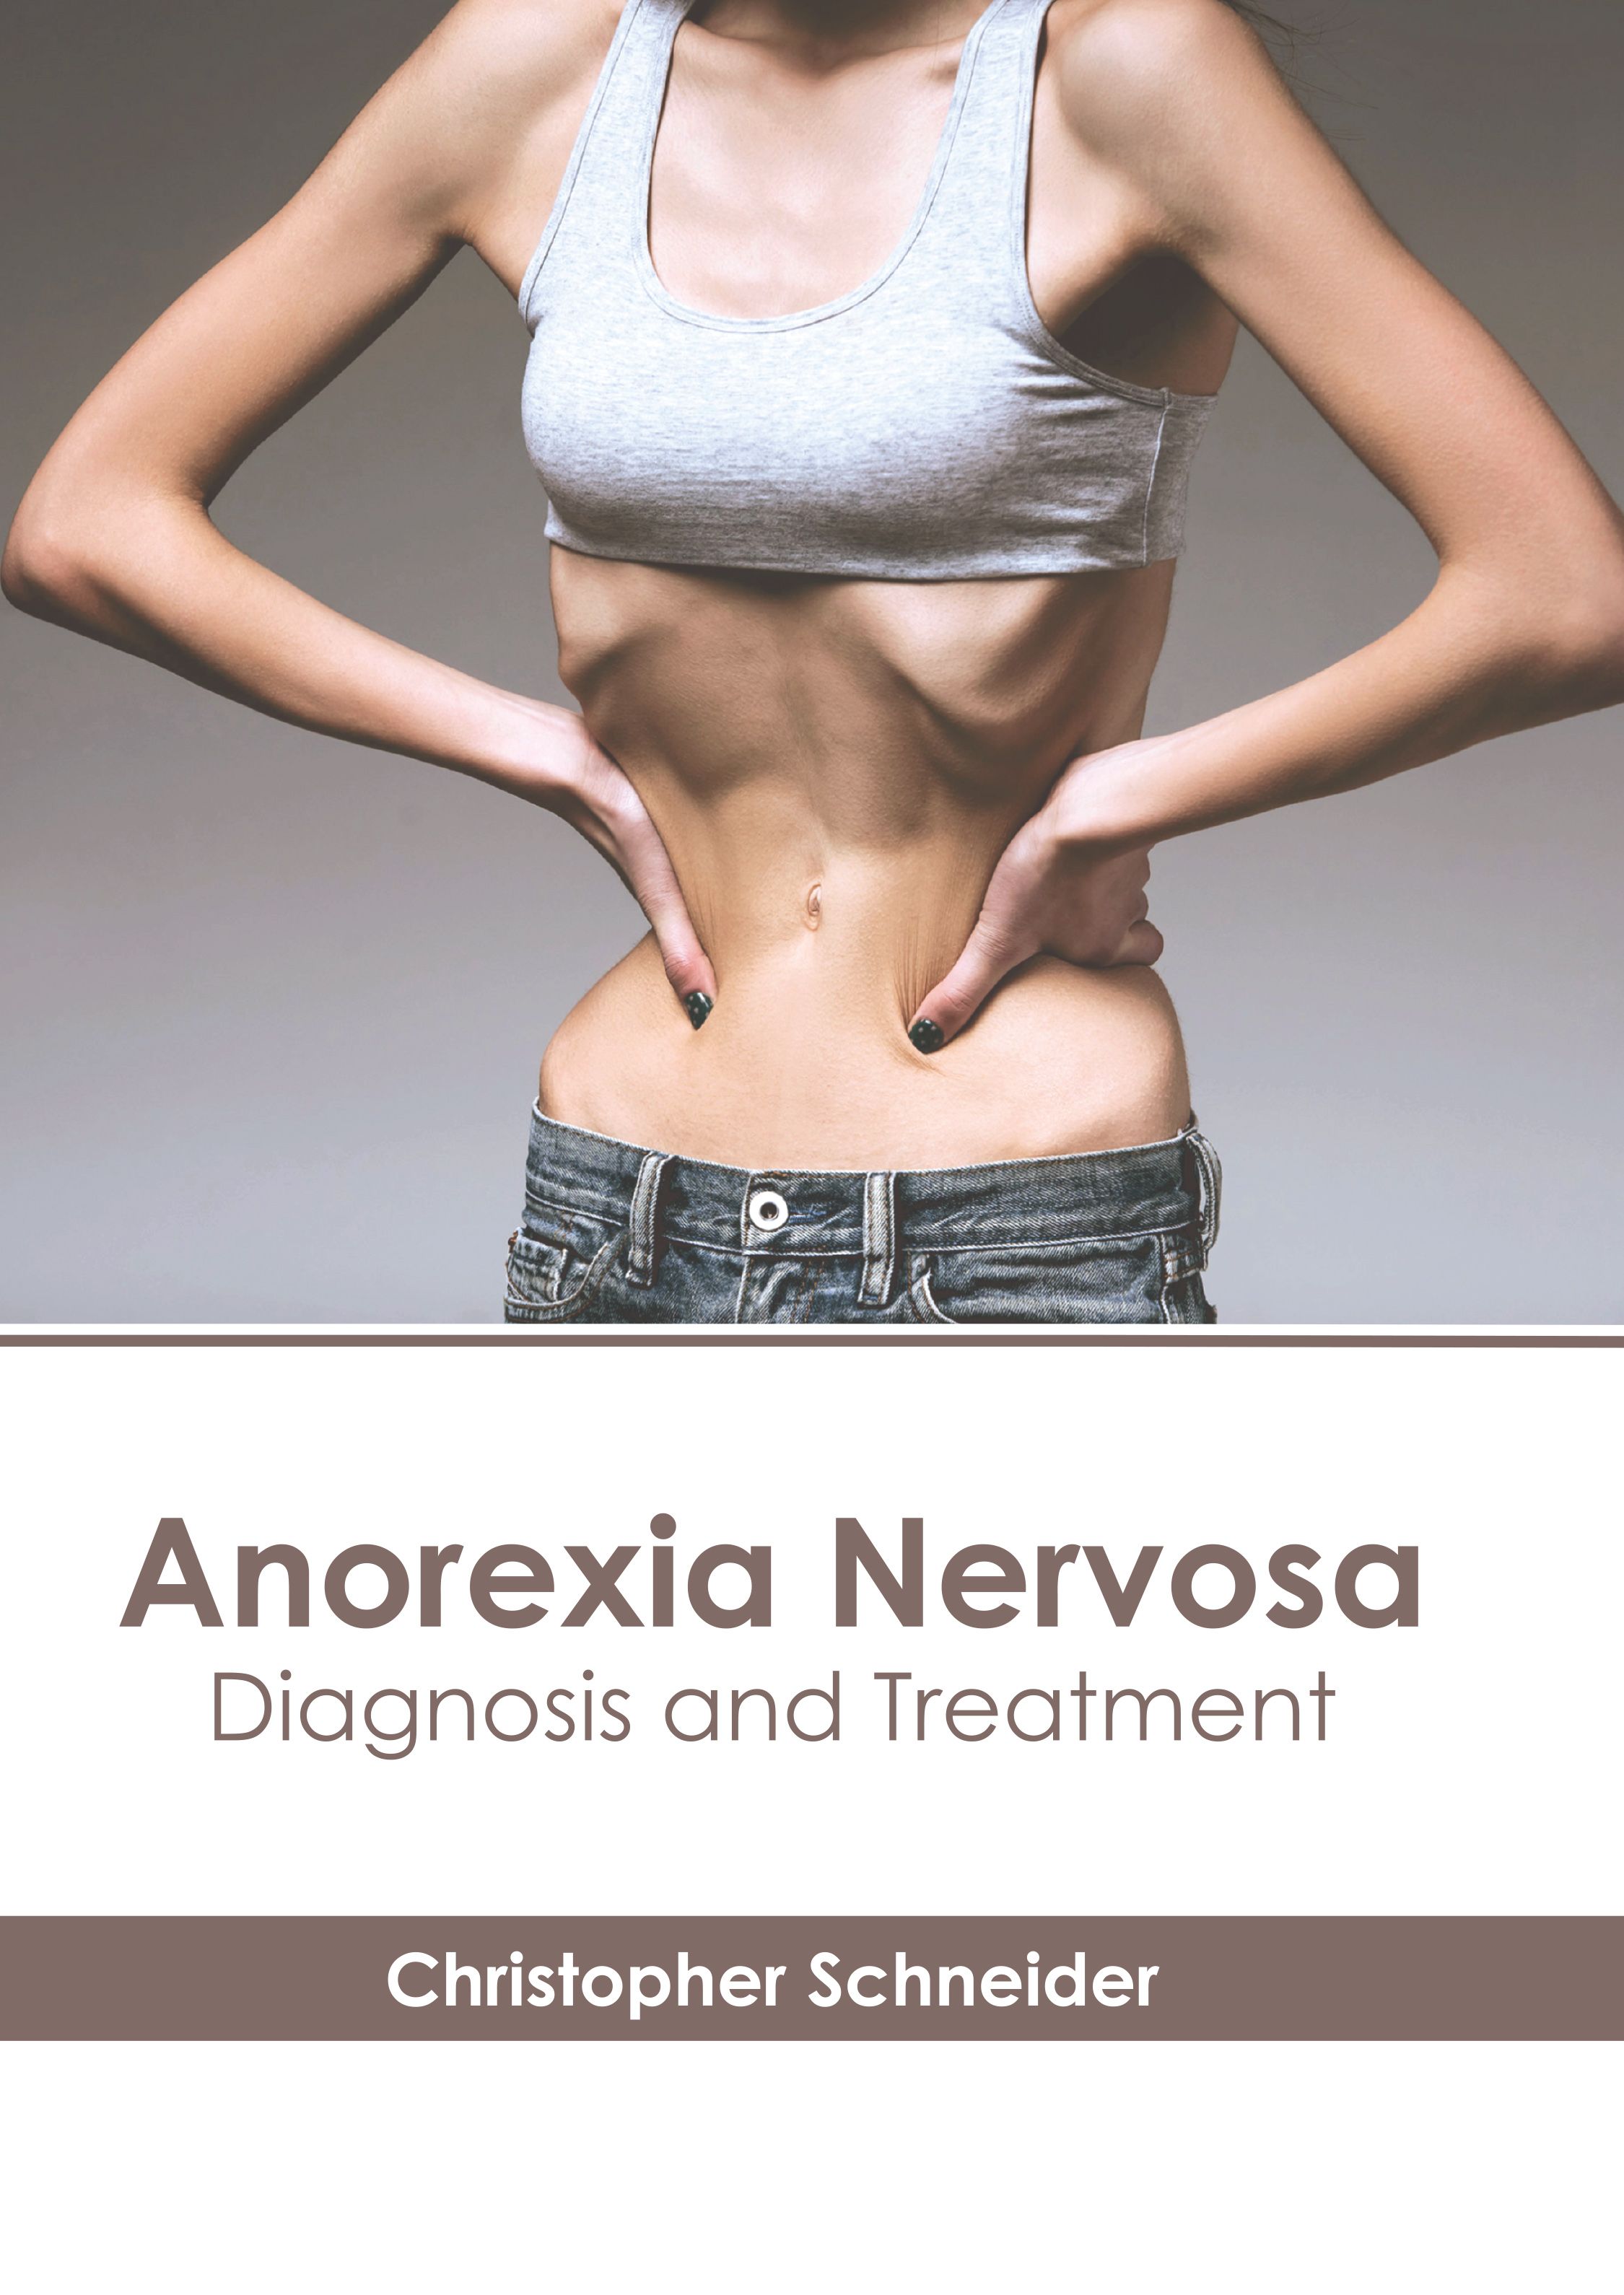 ANOREXIA NERVOSA: DIAGNOSIS AND TREATMENT